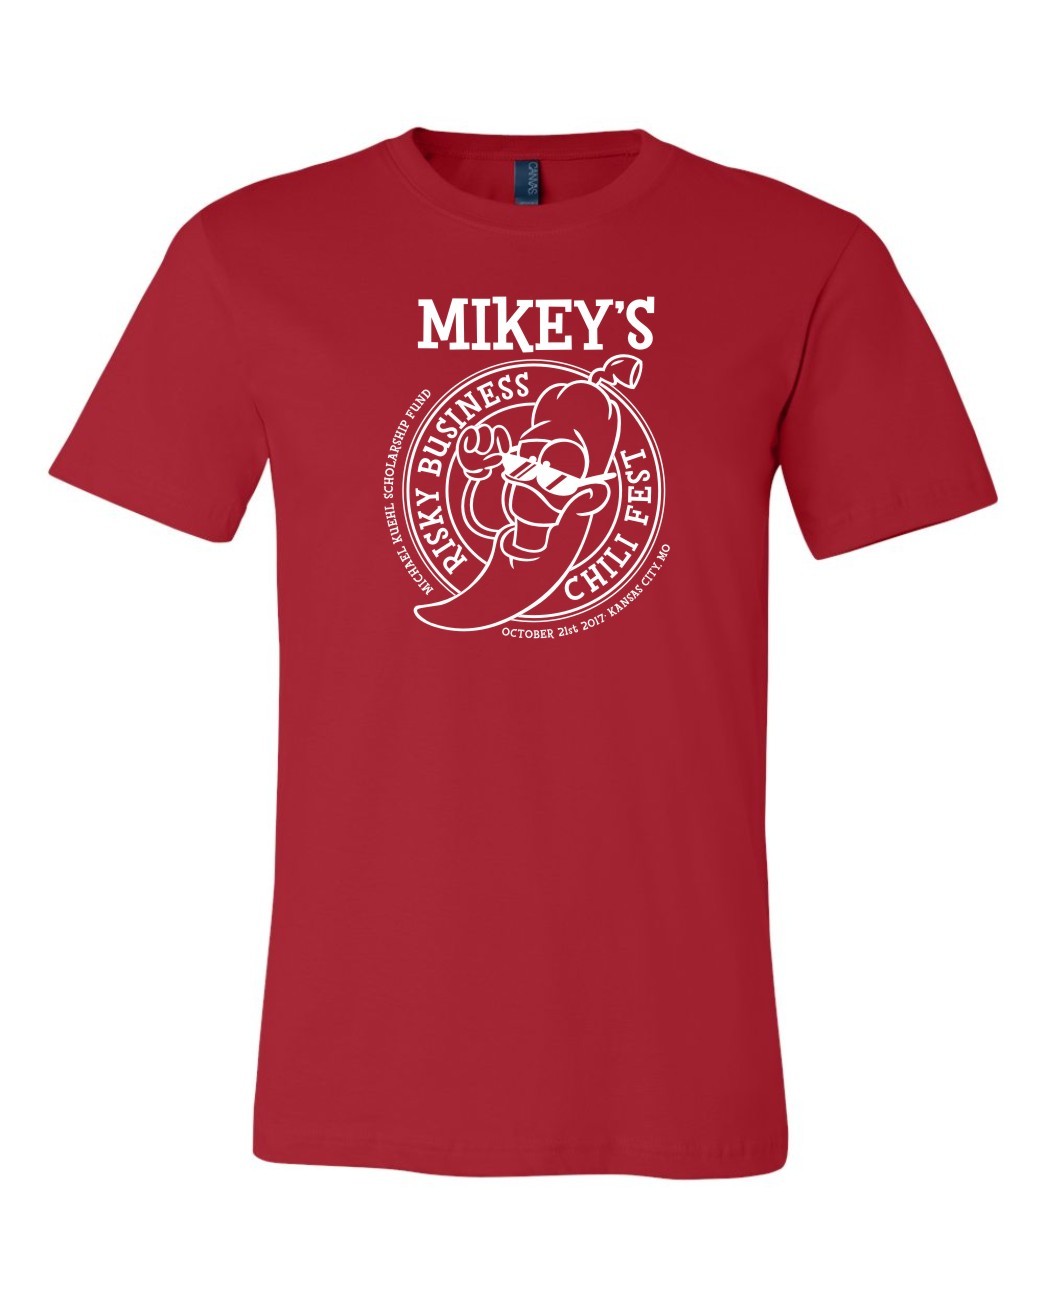 Mikey's Chili Fest 2017 01 Bella Canvas Short Sleeve t-shirt- ADULT & YOUTH 